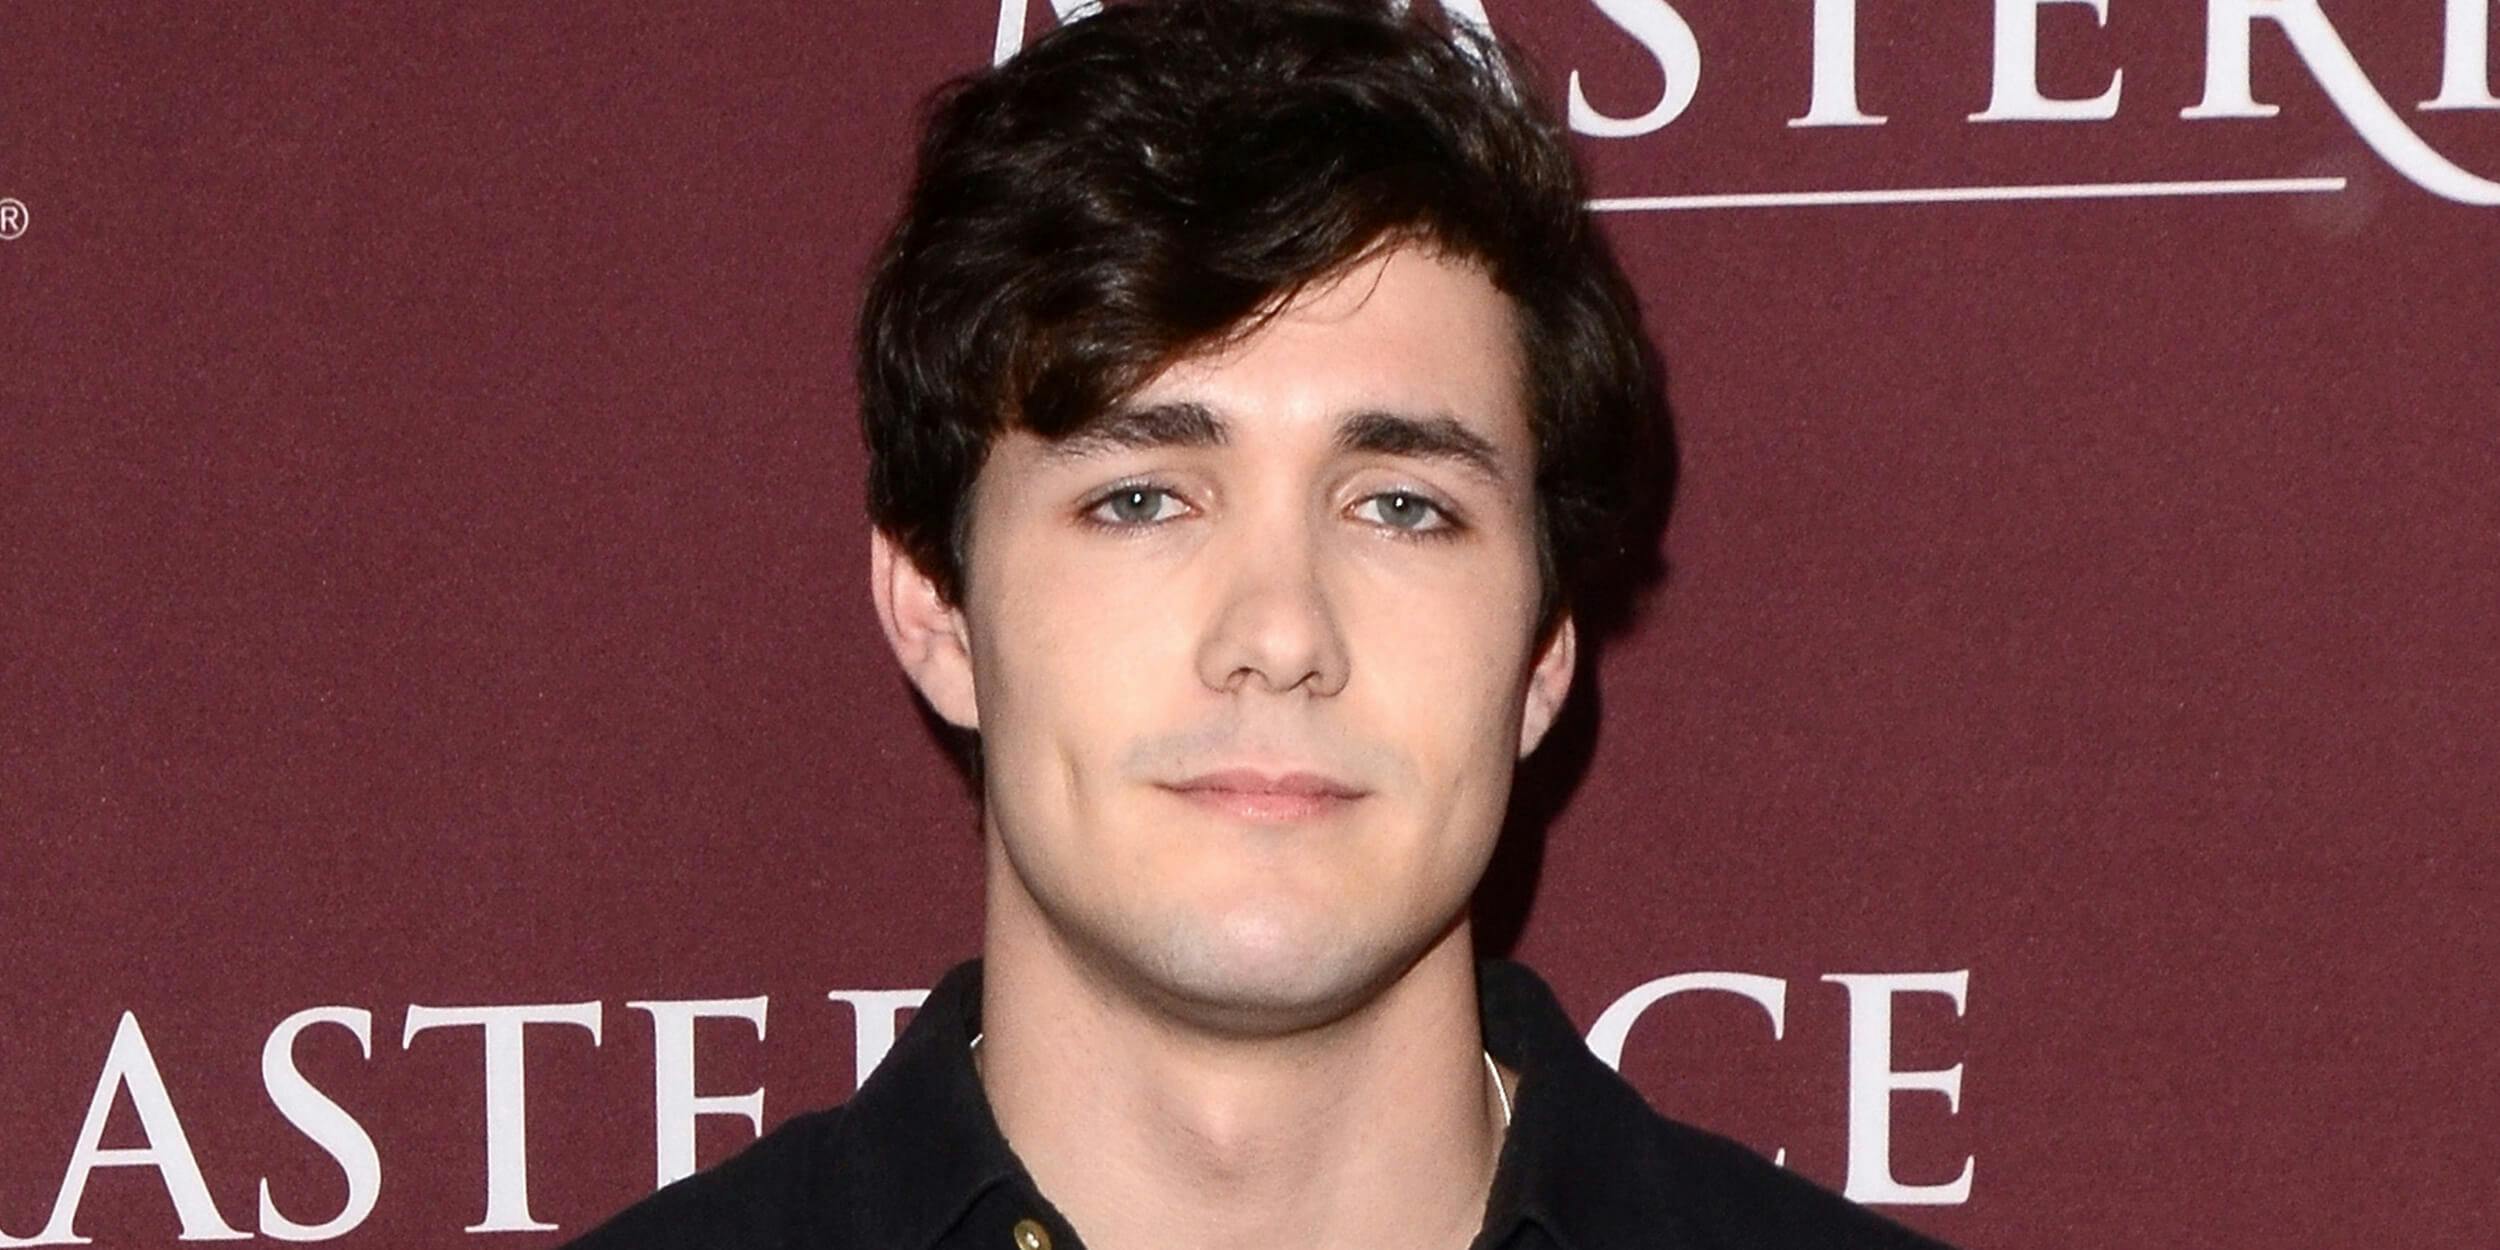 Who is Jonah HauerKing, Disney's new Prince Eric? The Daily Dot